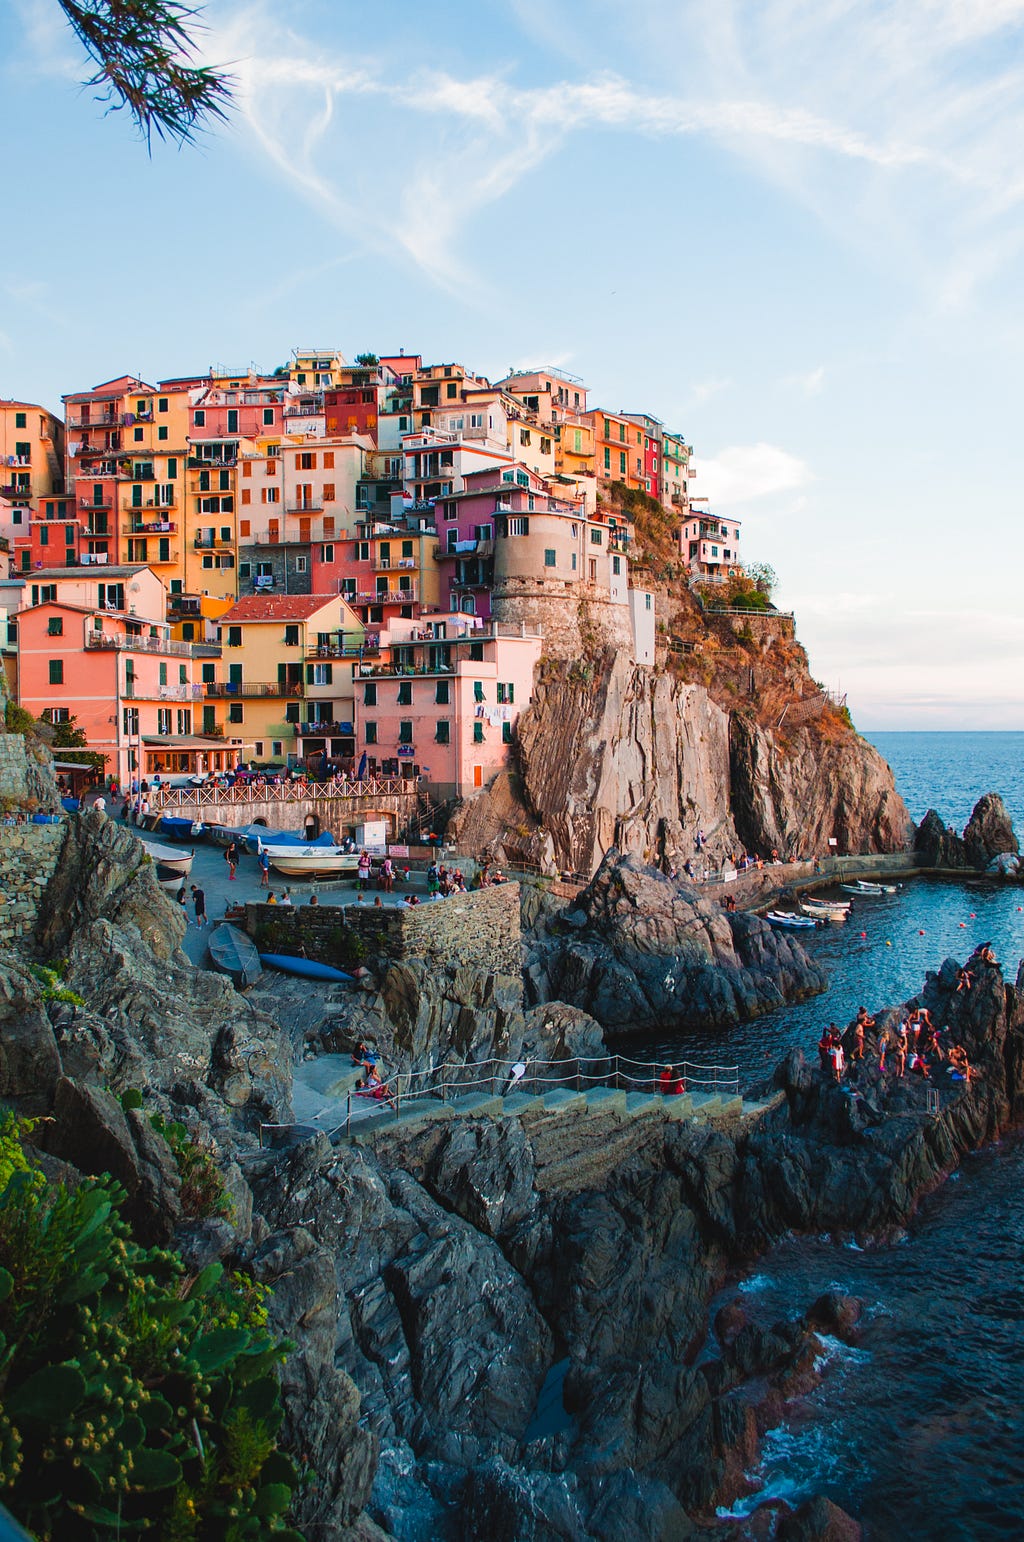 Colourful houses on cliffs with tourists in streets